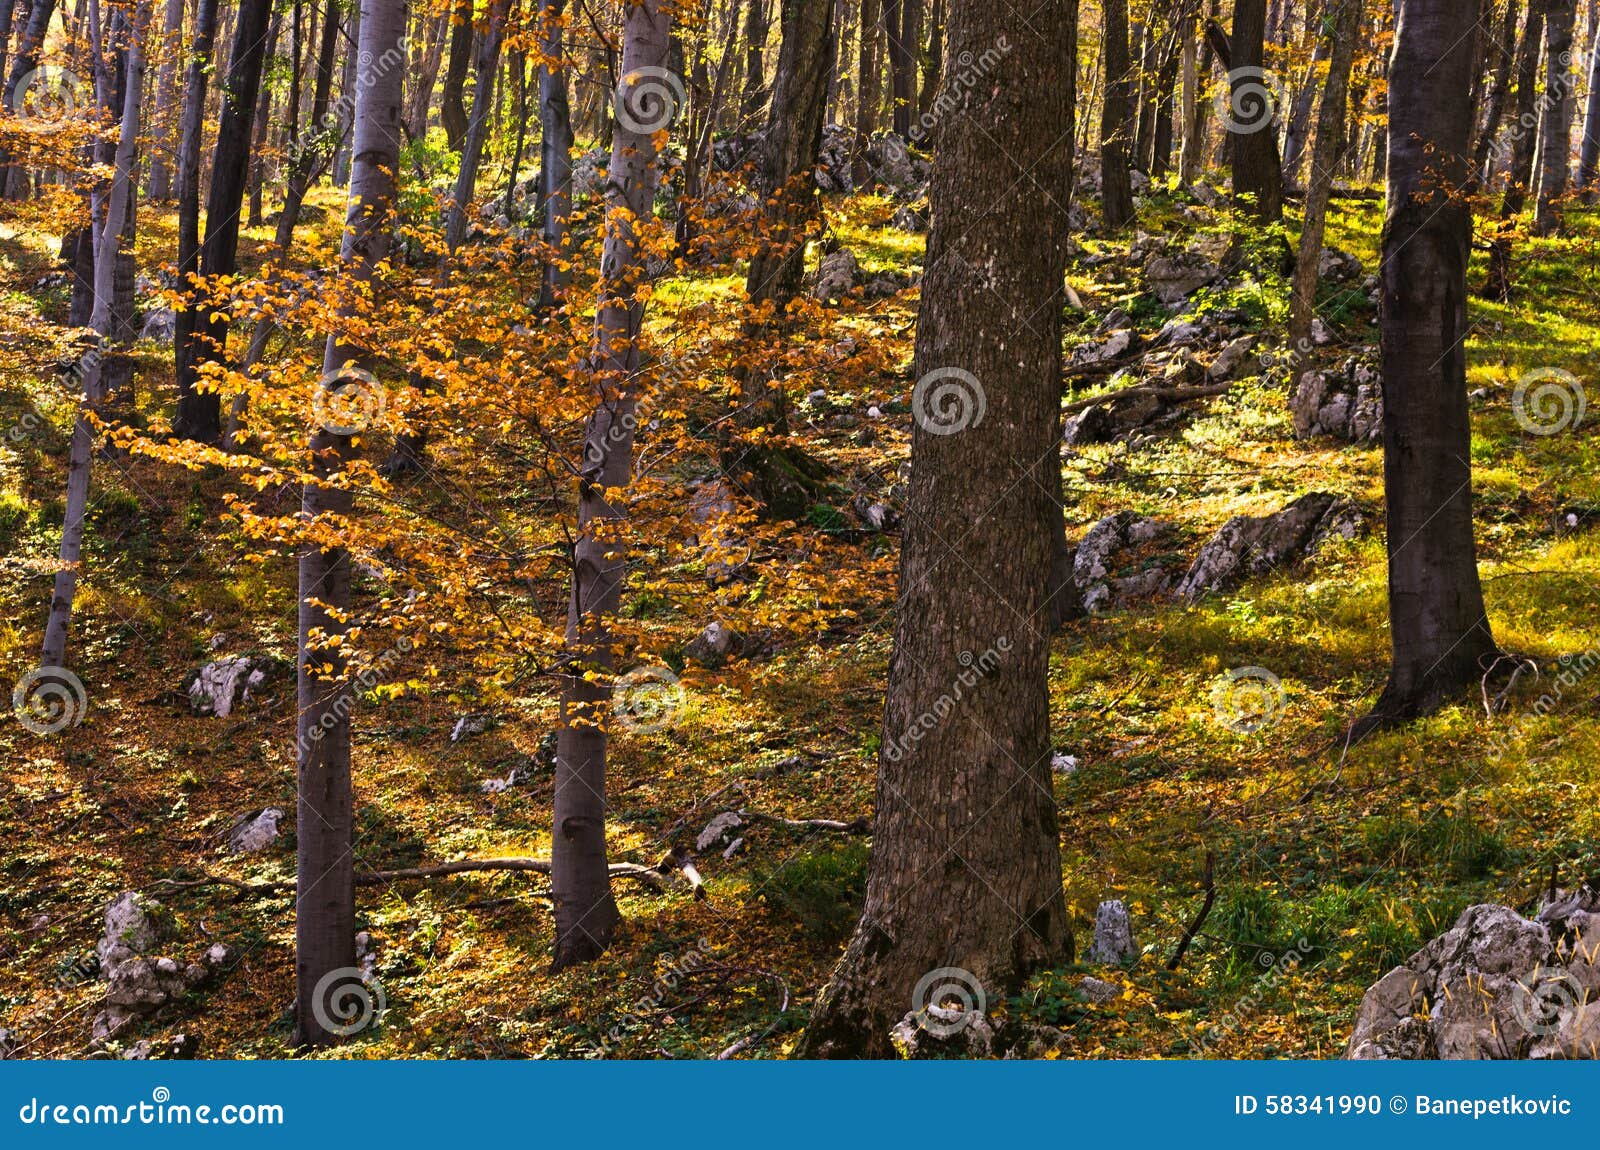 inside forests of djerdap national park on a fall sunny day